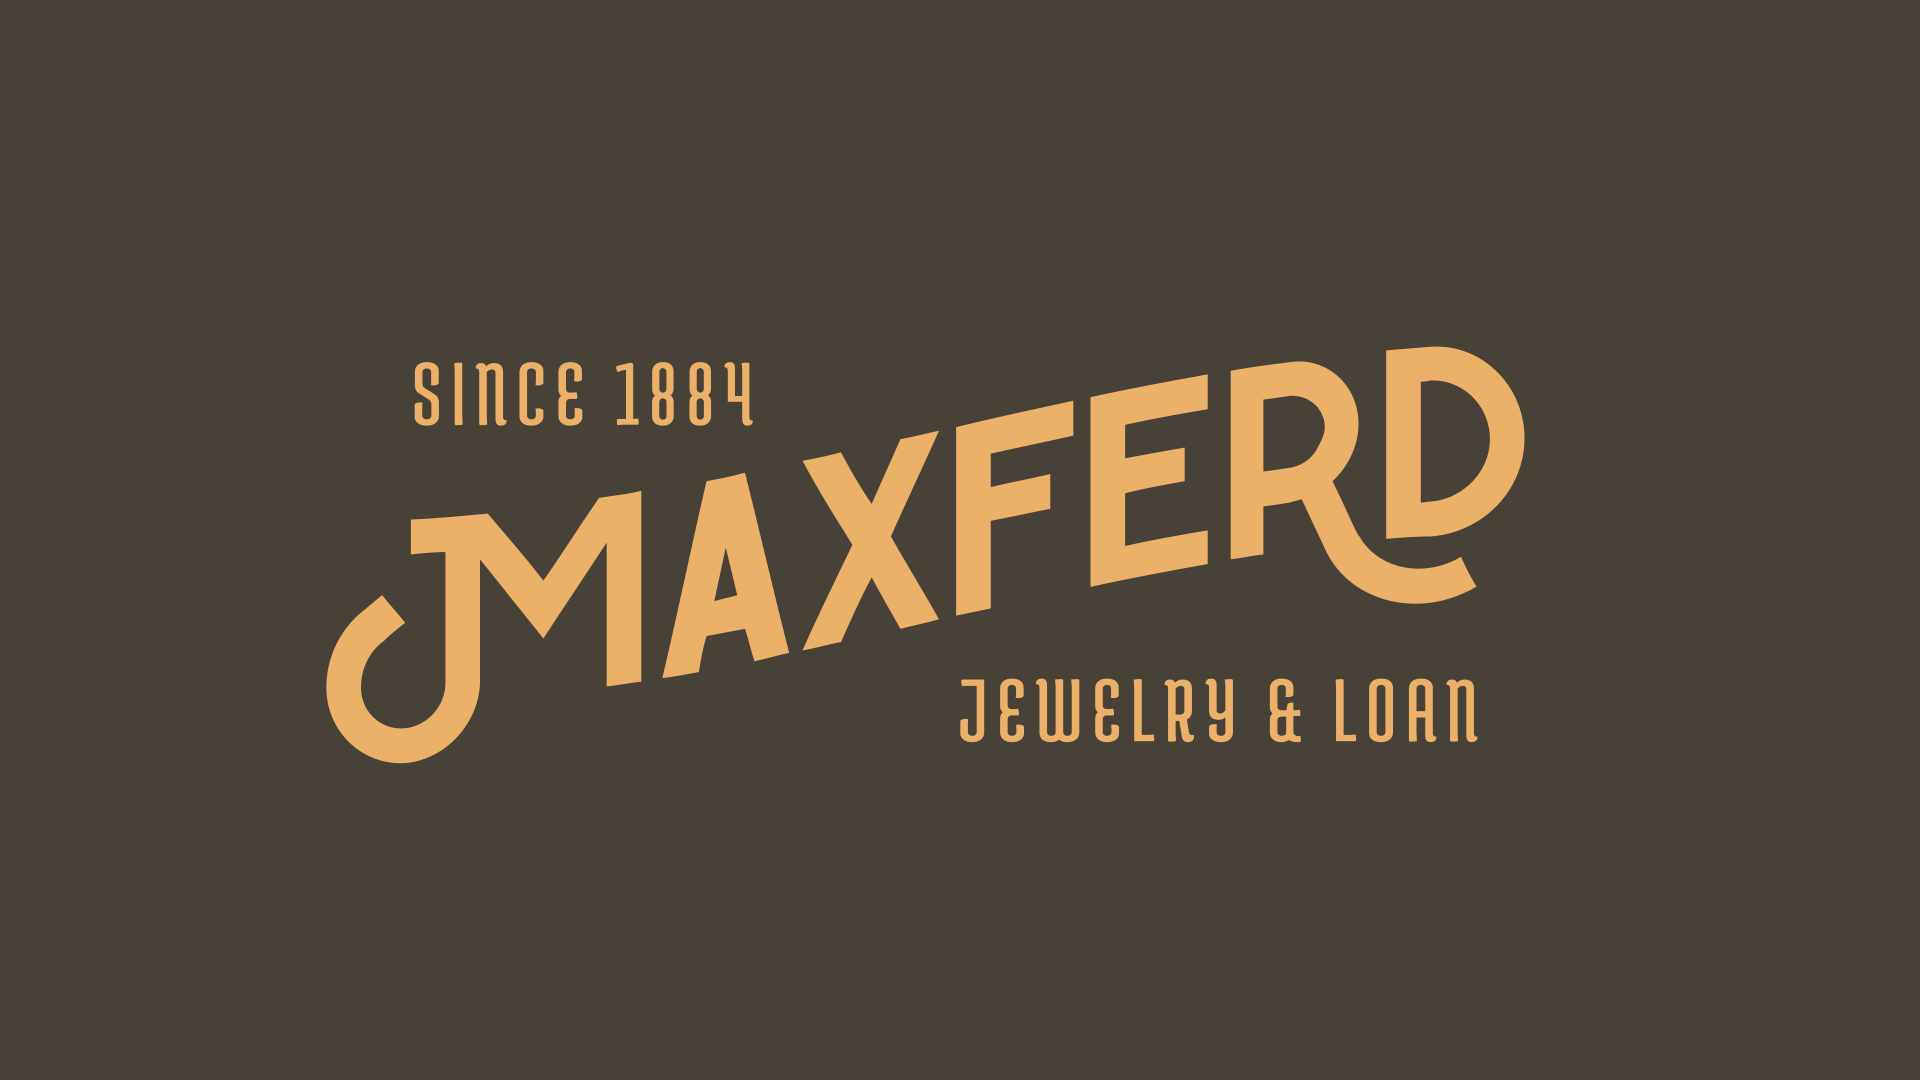 Maxferd Jewelry & Loan Announces 0% Interest on Single Loans Less Than $2500 for New Clients Across All 5 California Locations